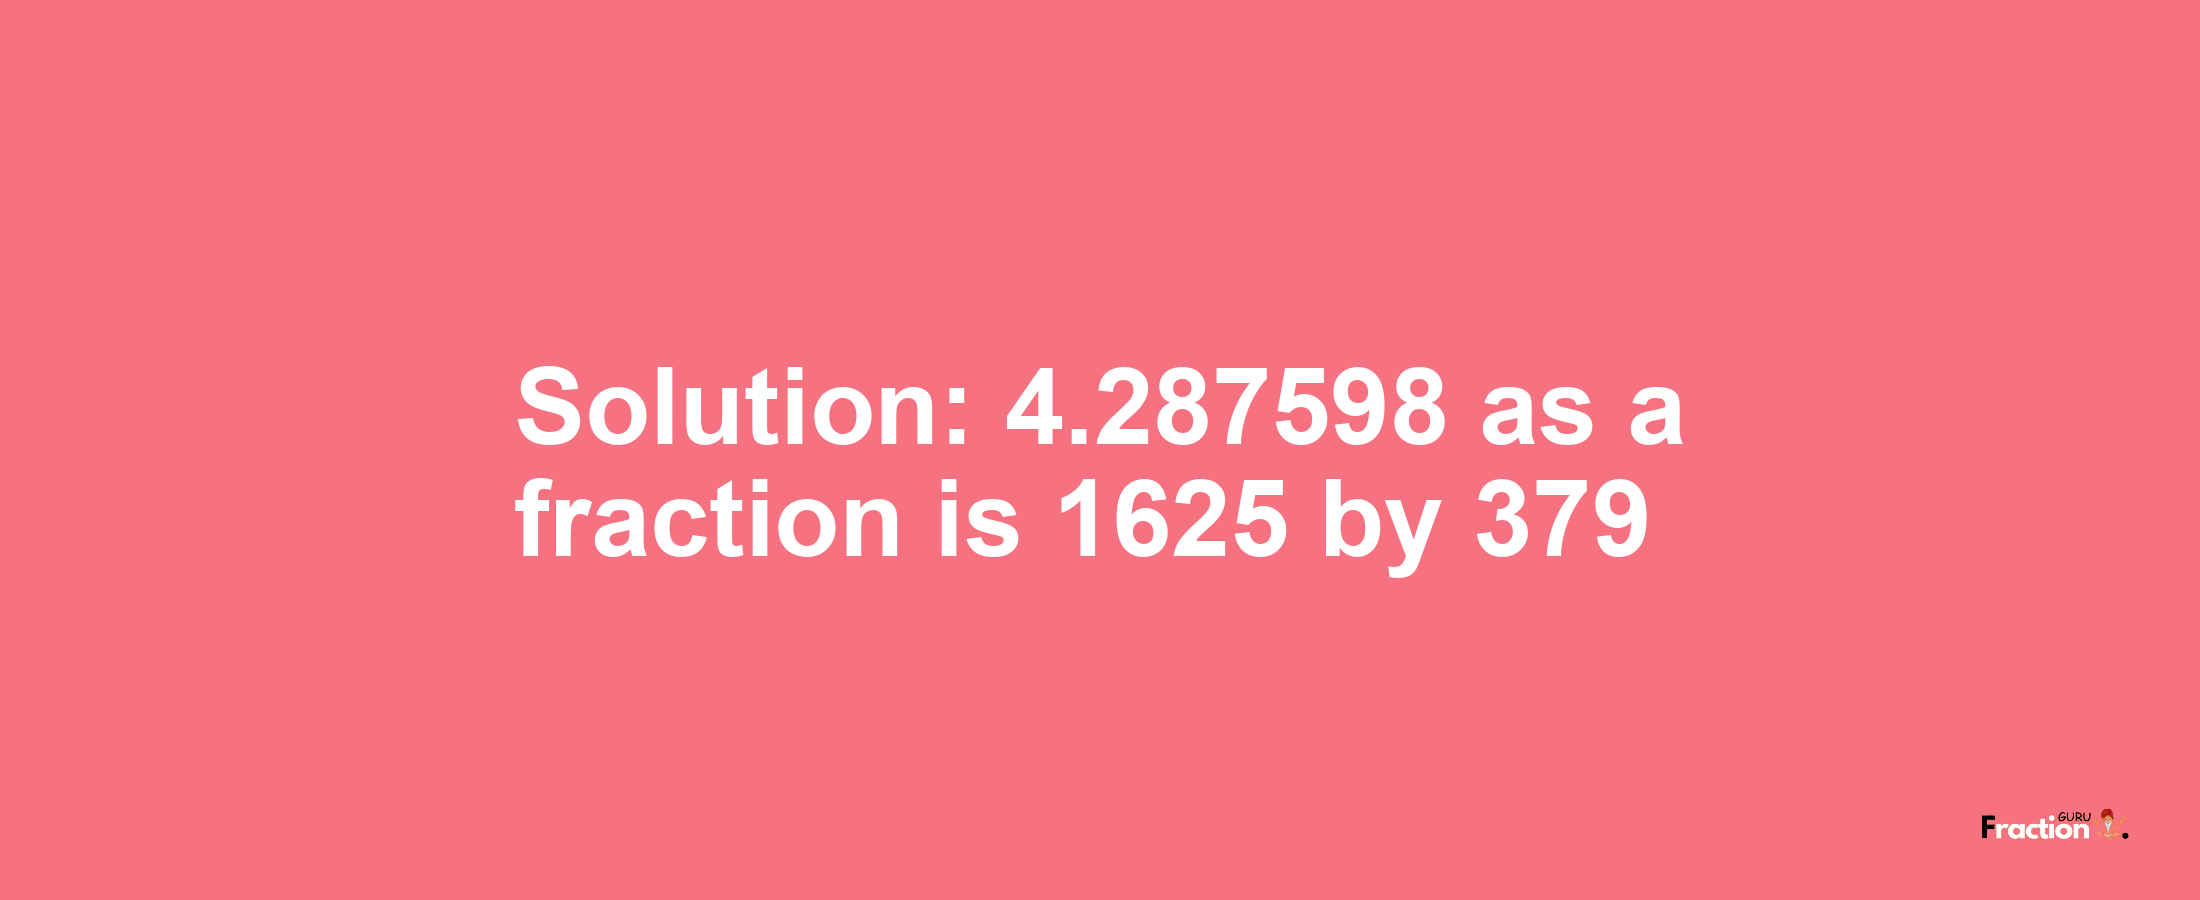 Solution:4.287598 as a fraction is 1625/379